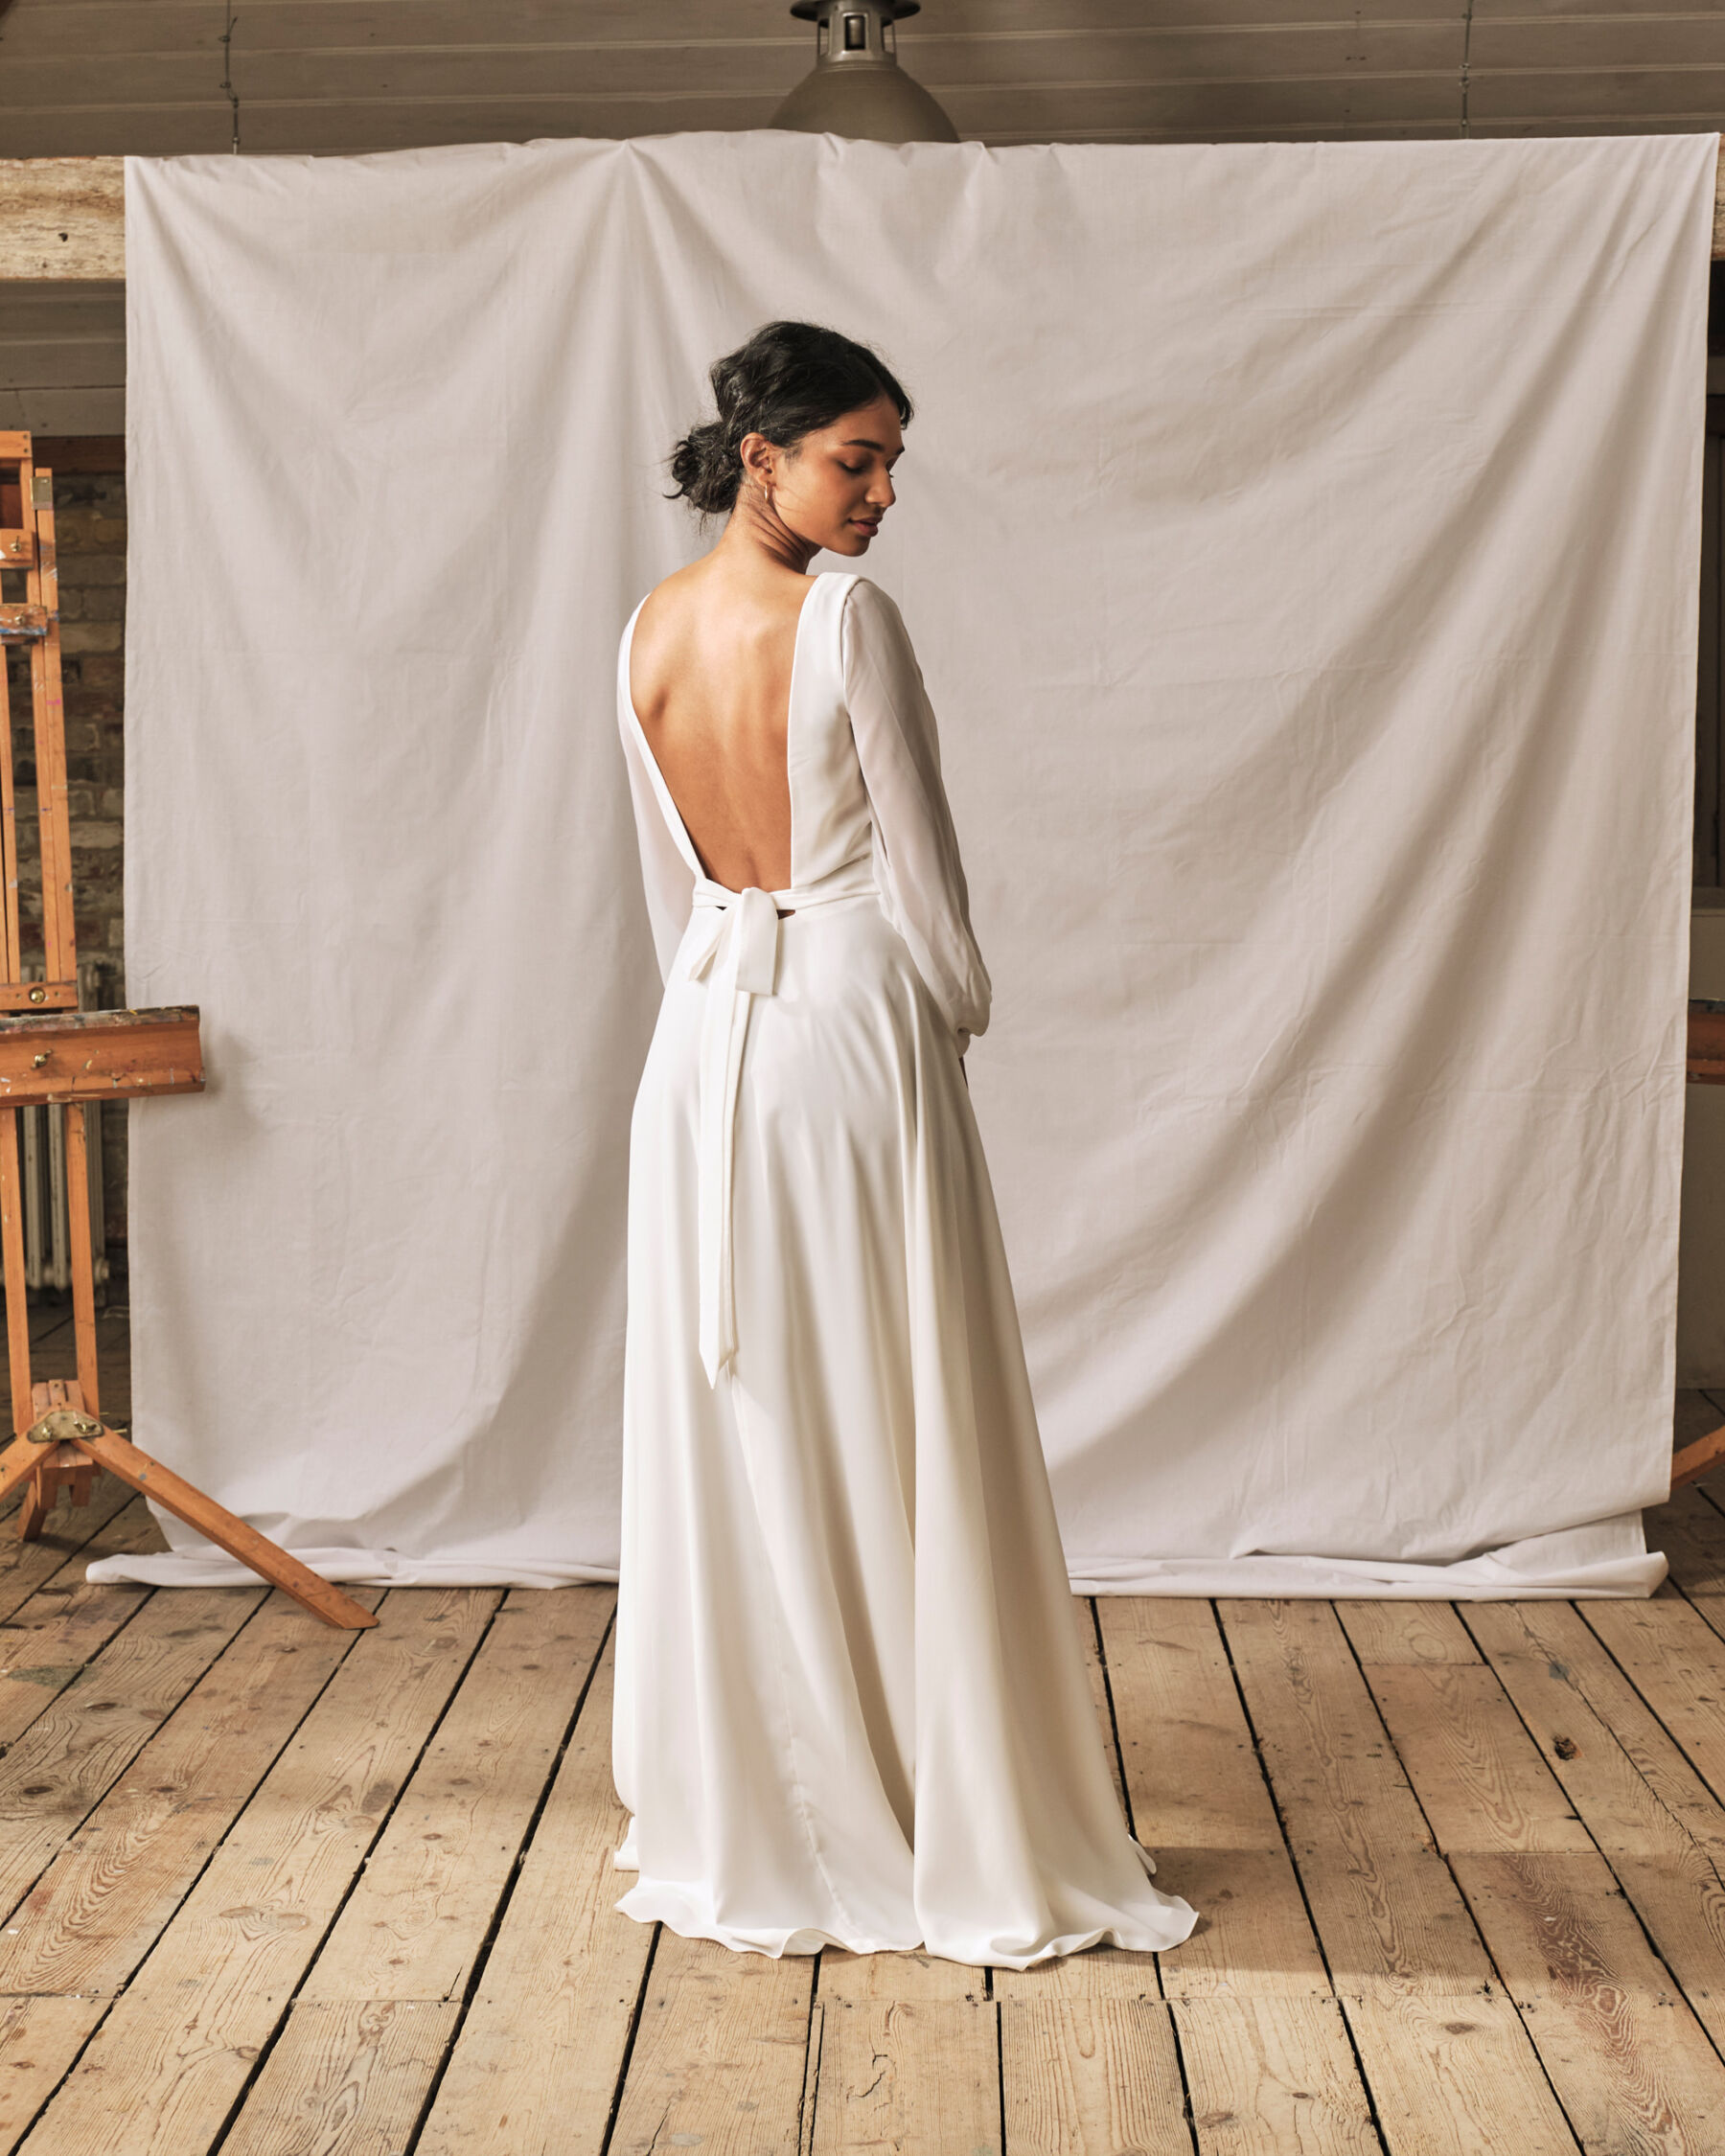 Simple backless wedding dress without a train, by Sophie Rose Bridal.